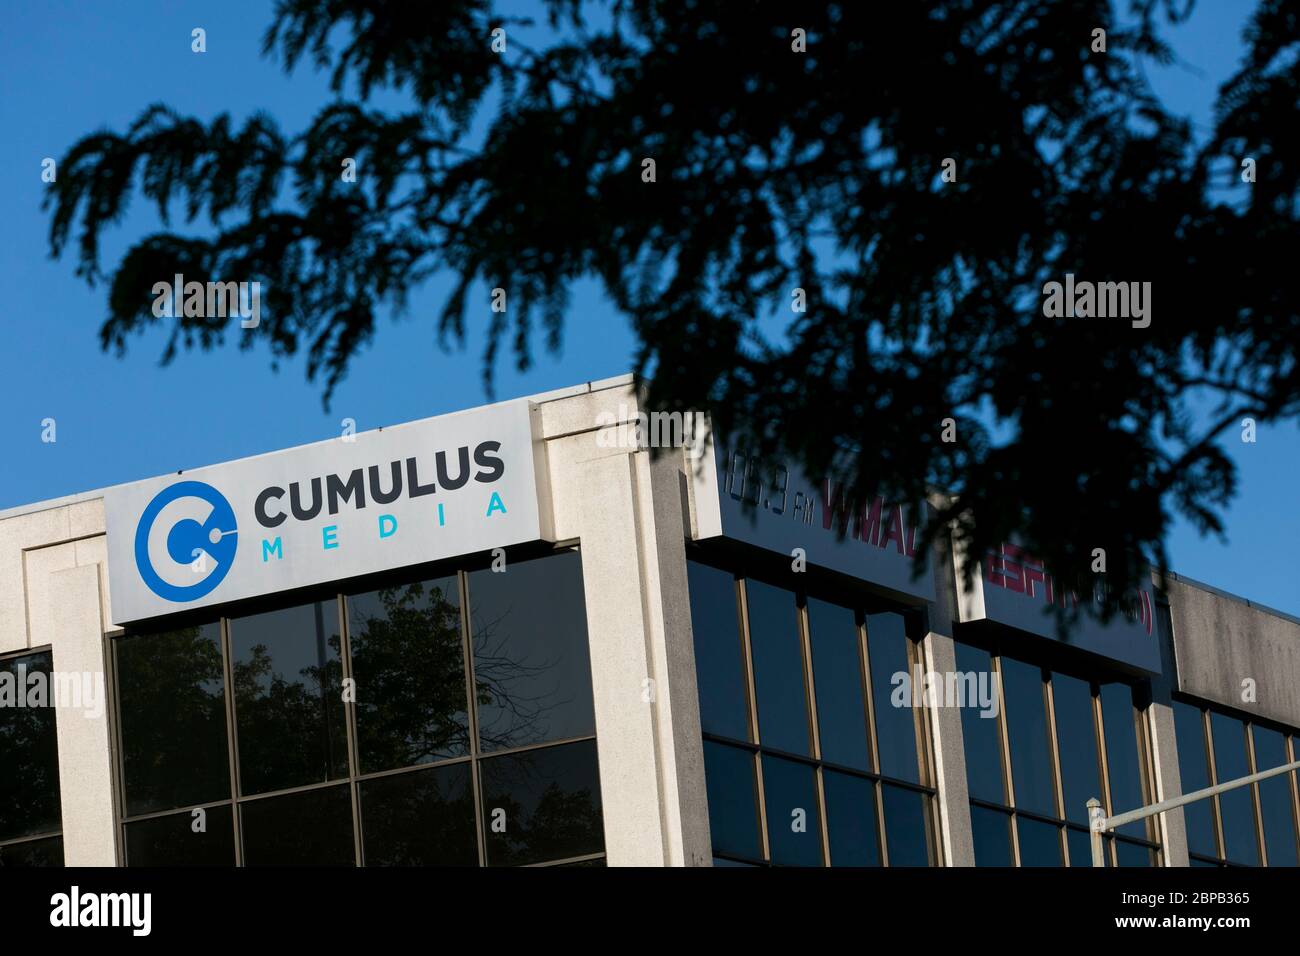 A logo sign outside of a facility occupied by Cumulus Media in Washington, D.C., on May 9, 2020. Stock Photo